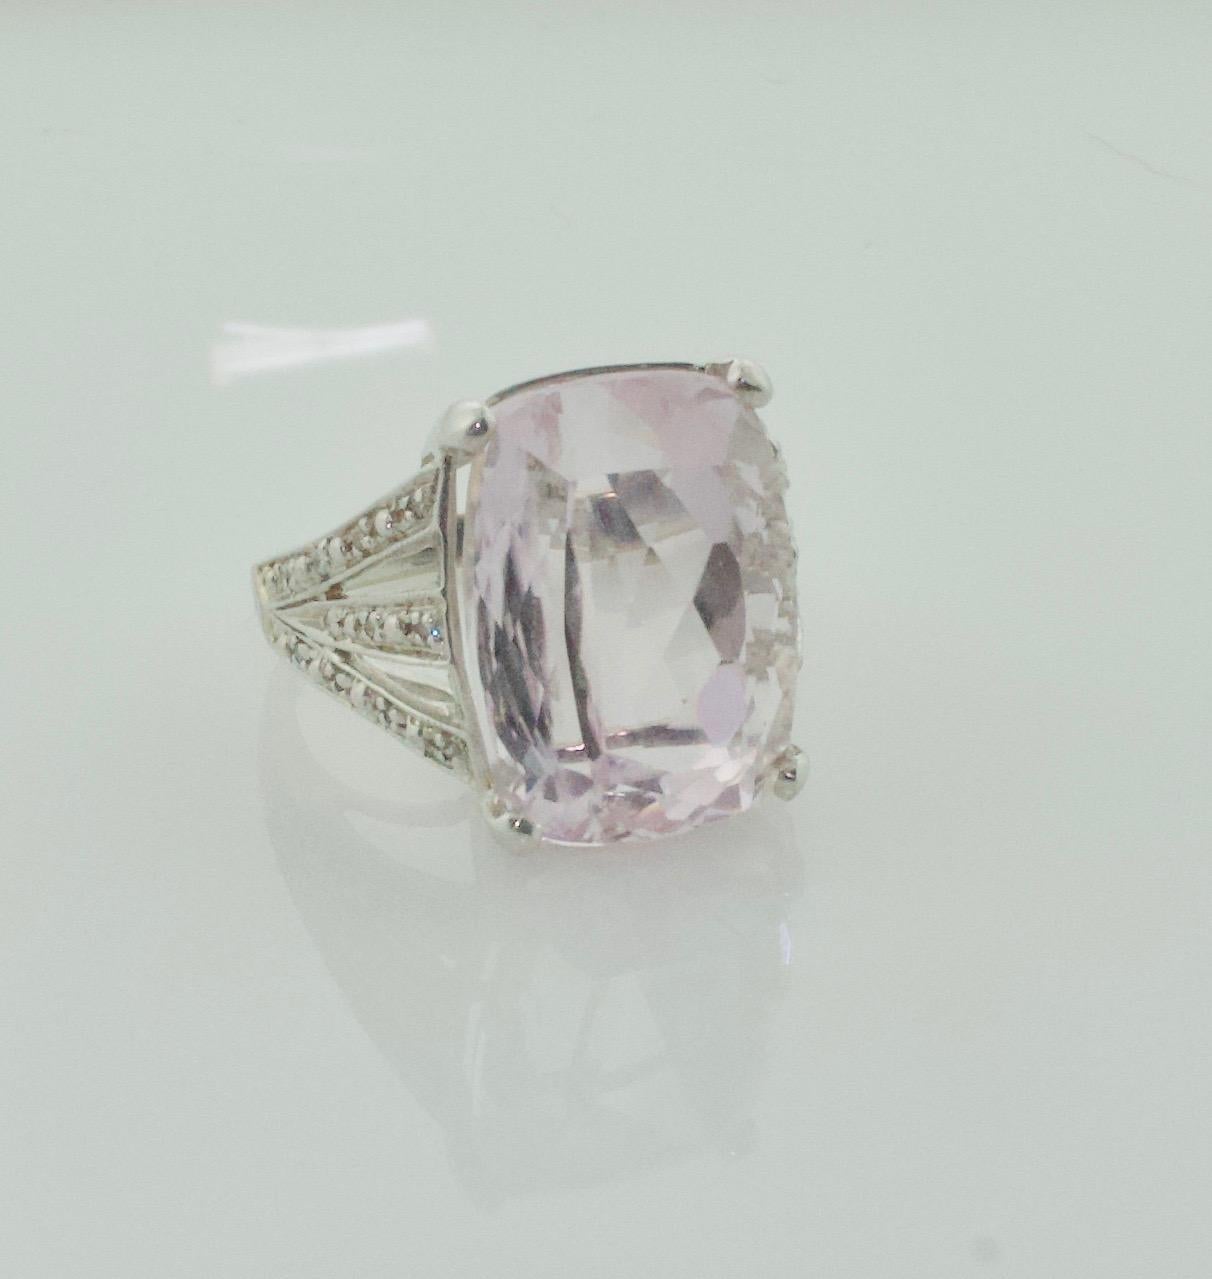 Big Kunzite and Diamond Ring in White Gold
One Cushion Cut Kunzite Weighing 26.00 Carats Approximately [bright with no imperfections visible to the naked eye]
26 Round Brilliant Cut Diamonds Weighing .15 Carats Approximately 